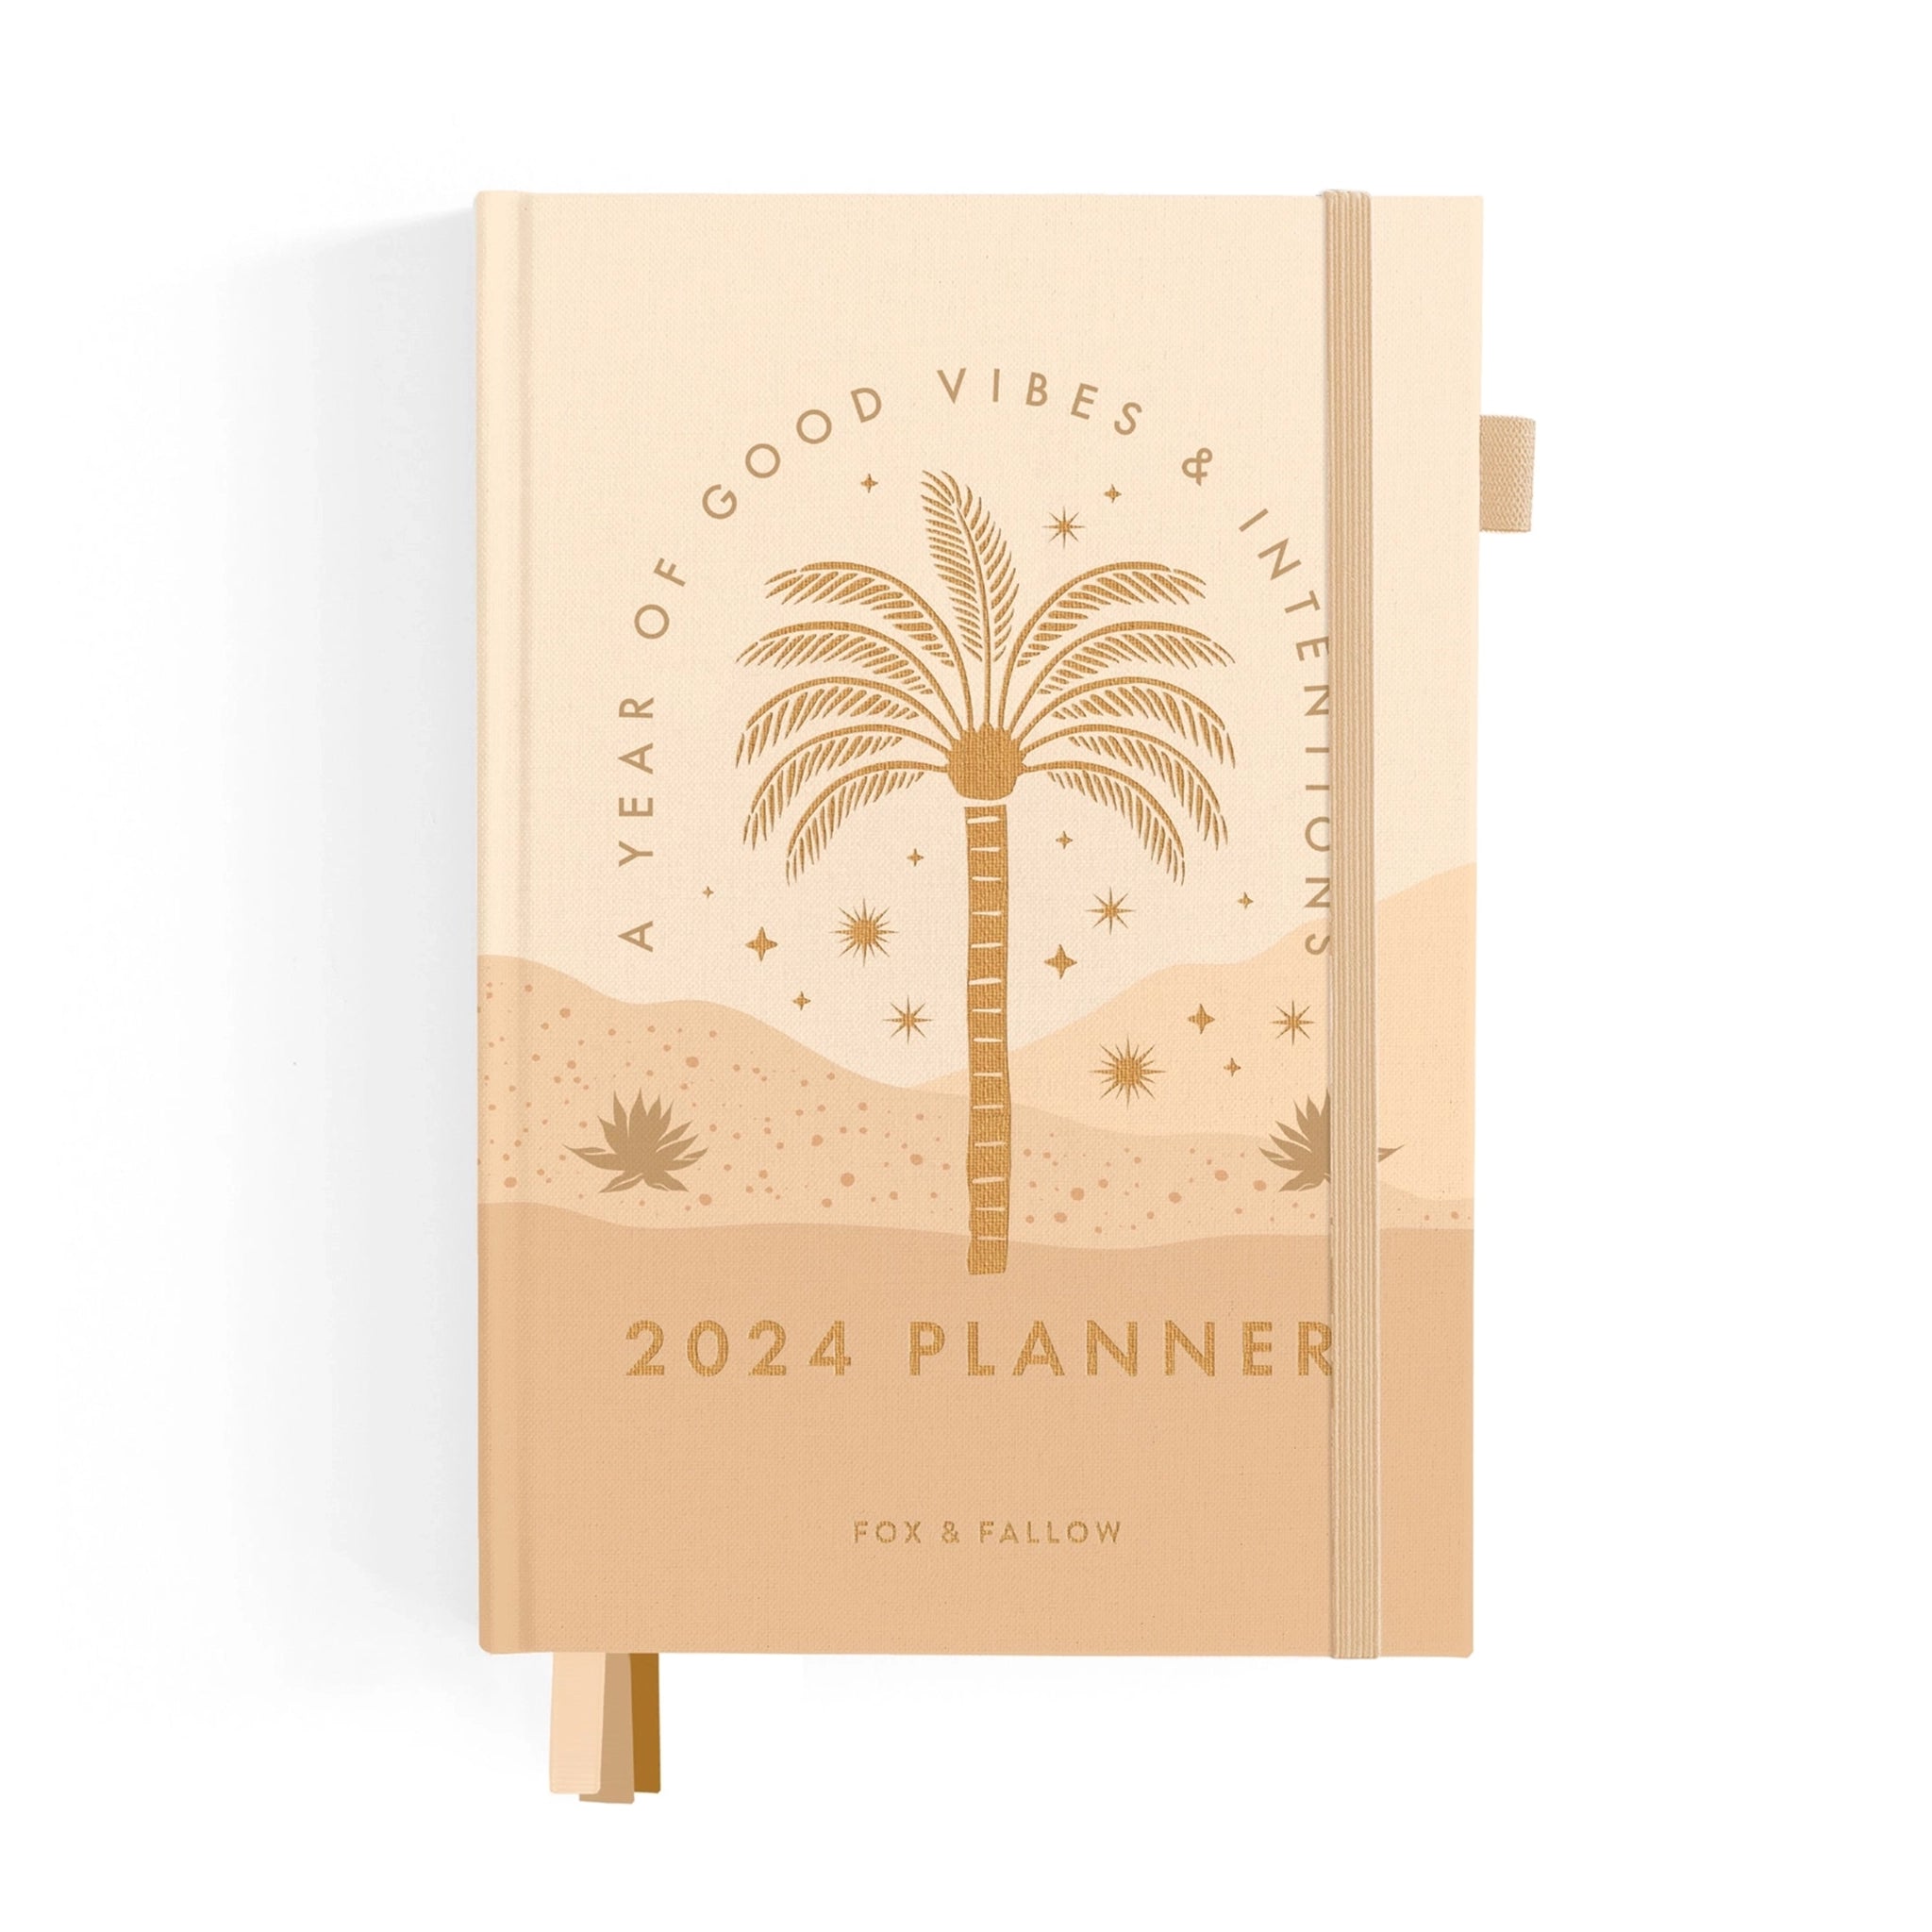 On a white background is a tan planner with gold foiled &quot;2024 Planner&quot; text in the center as well as arched text over a palm tree design that reads, &quot;A Year Of Good Vibes &amp; Intentions&quot; and a light pink elastic loop for keeping shut.